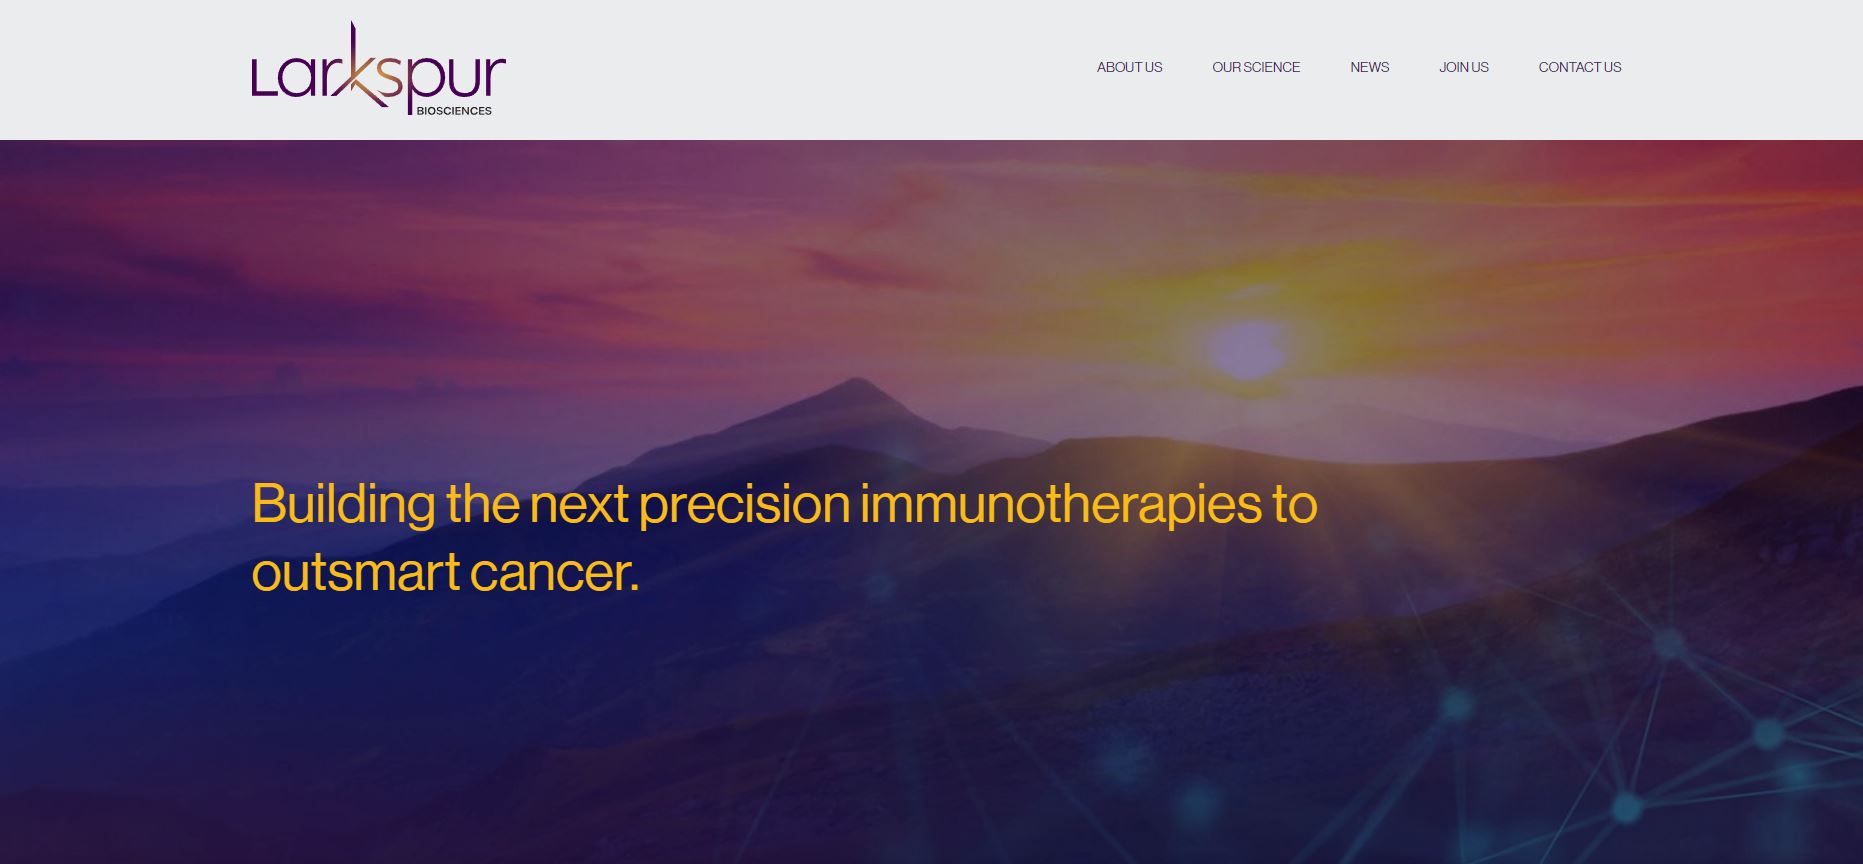 With an impressive $35.5M raised, Larkspur Biosciences is on a mission to build the next generation of precision immunotherapies